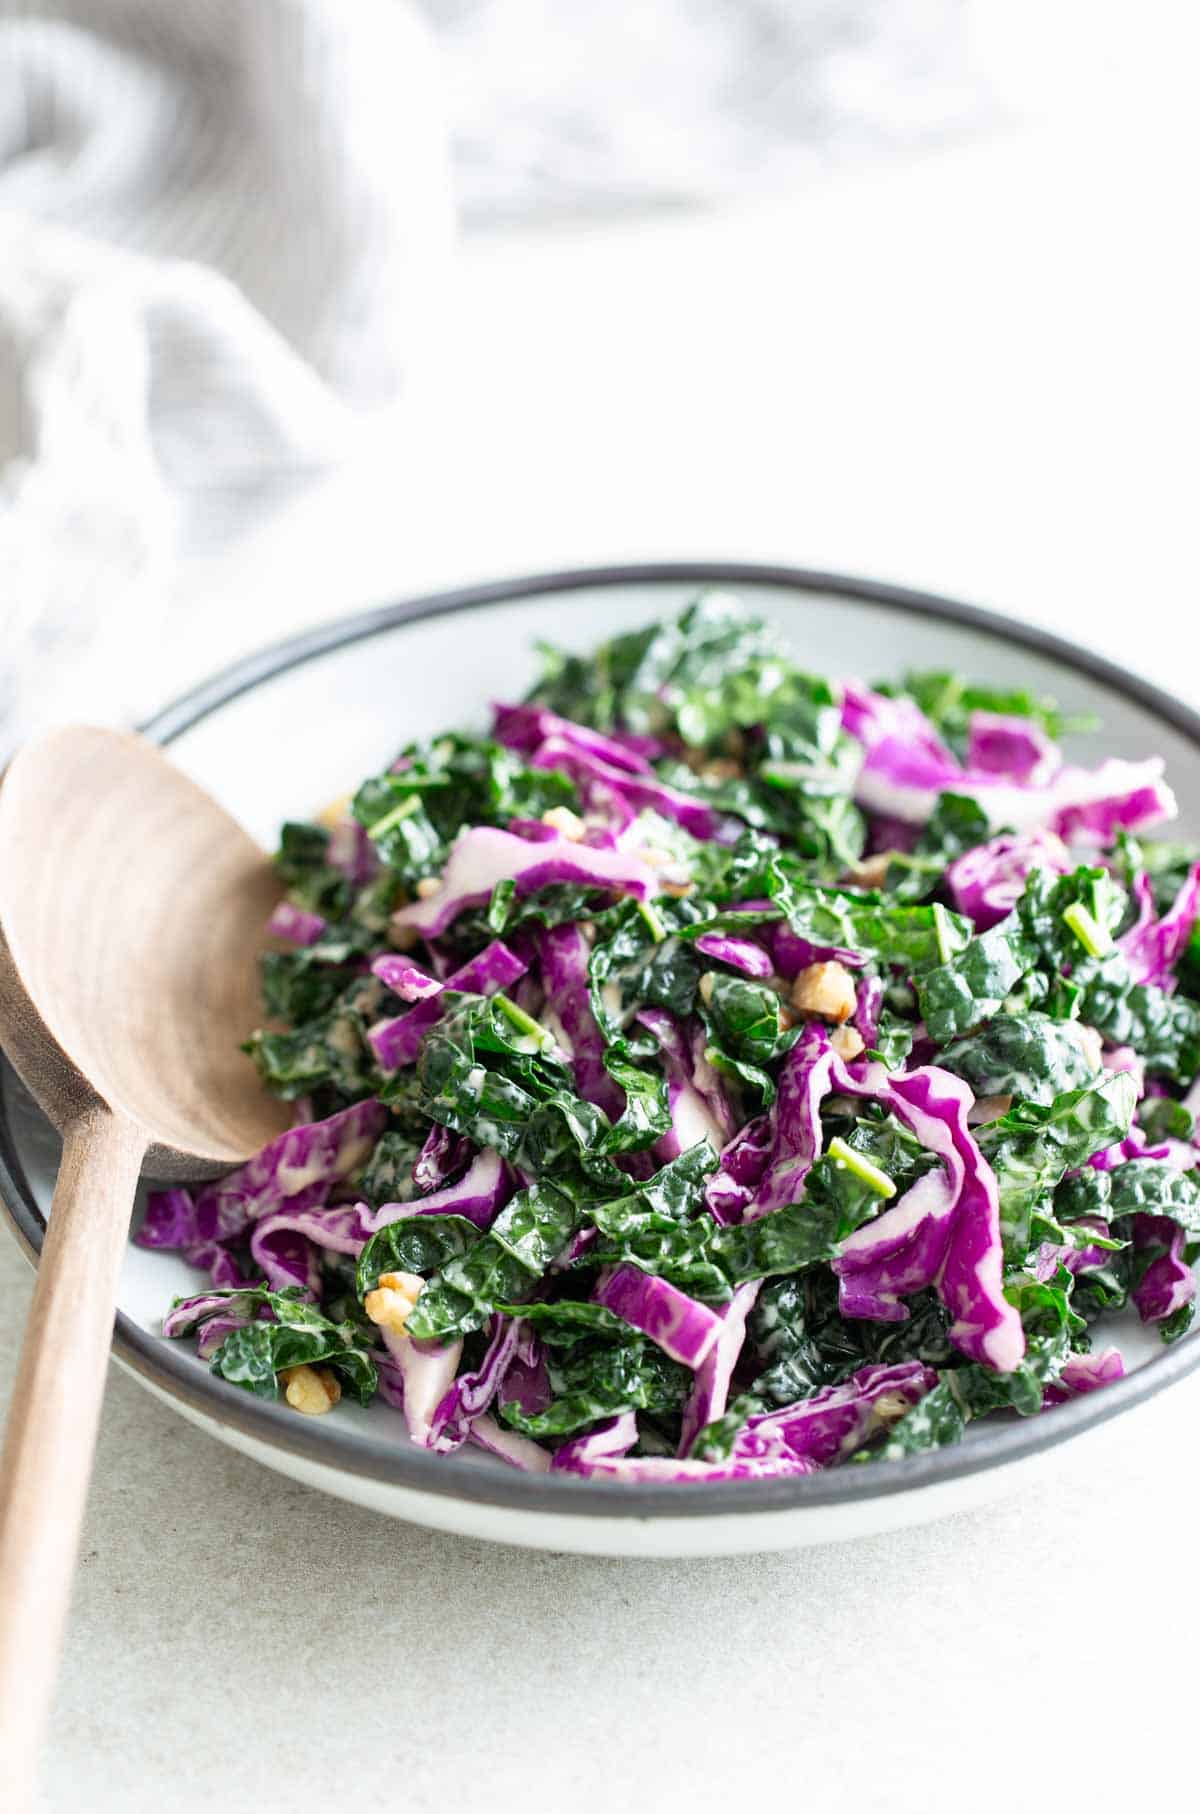 Kale salad in a bowl with a wooden spoon.